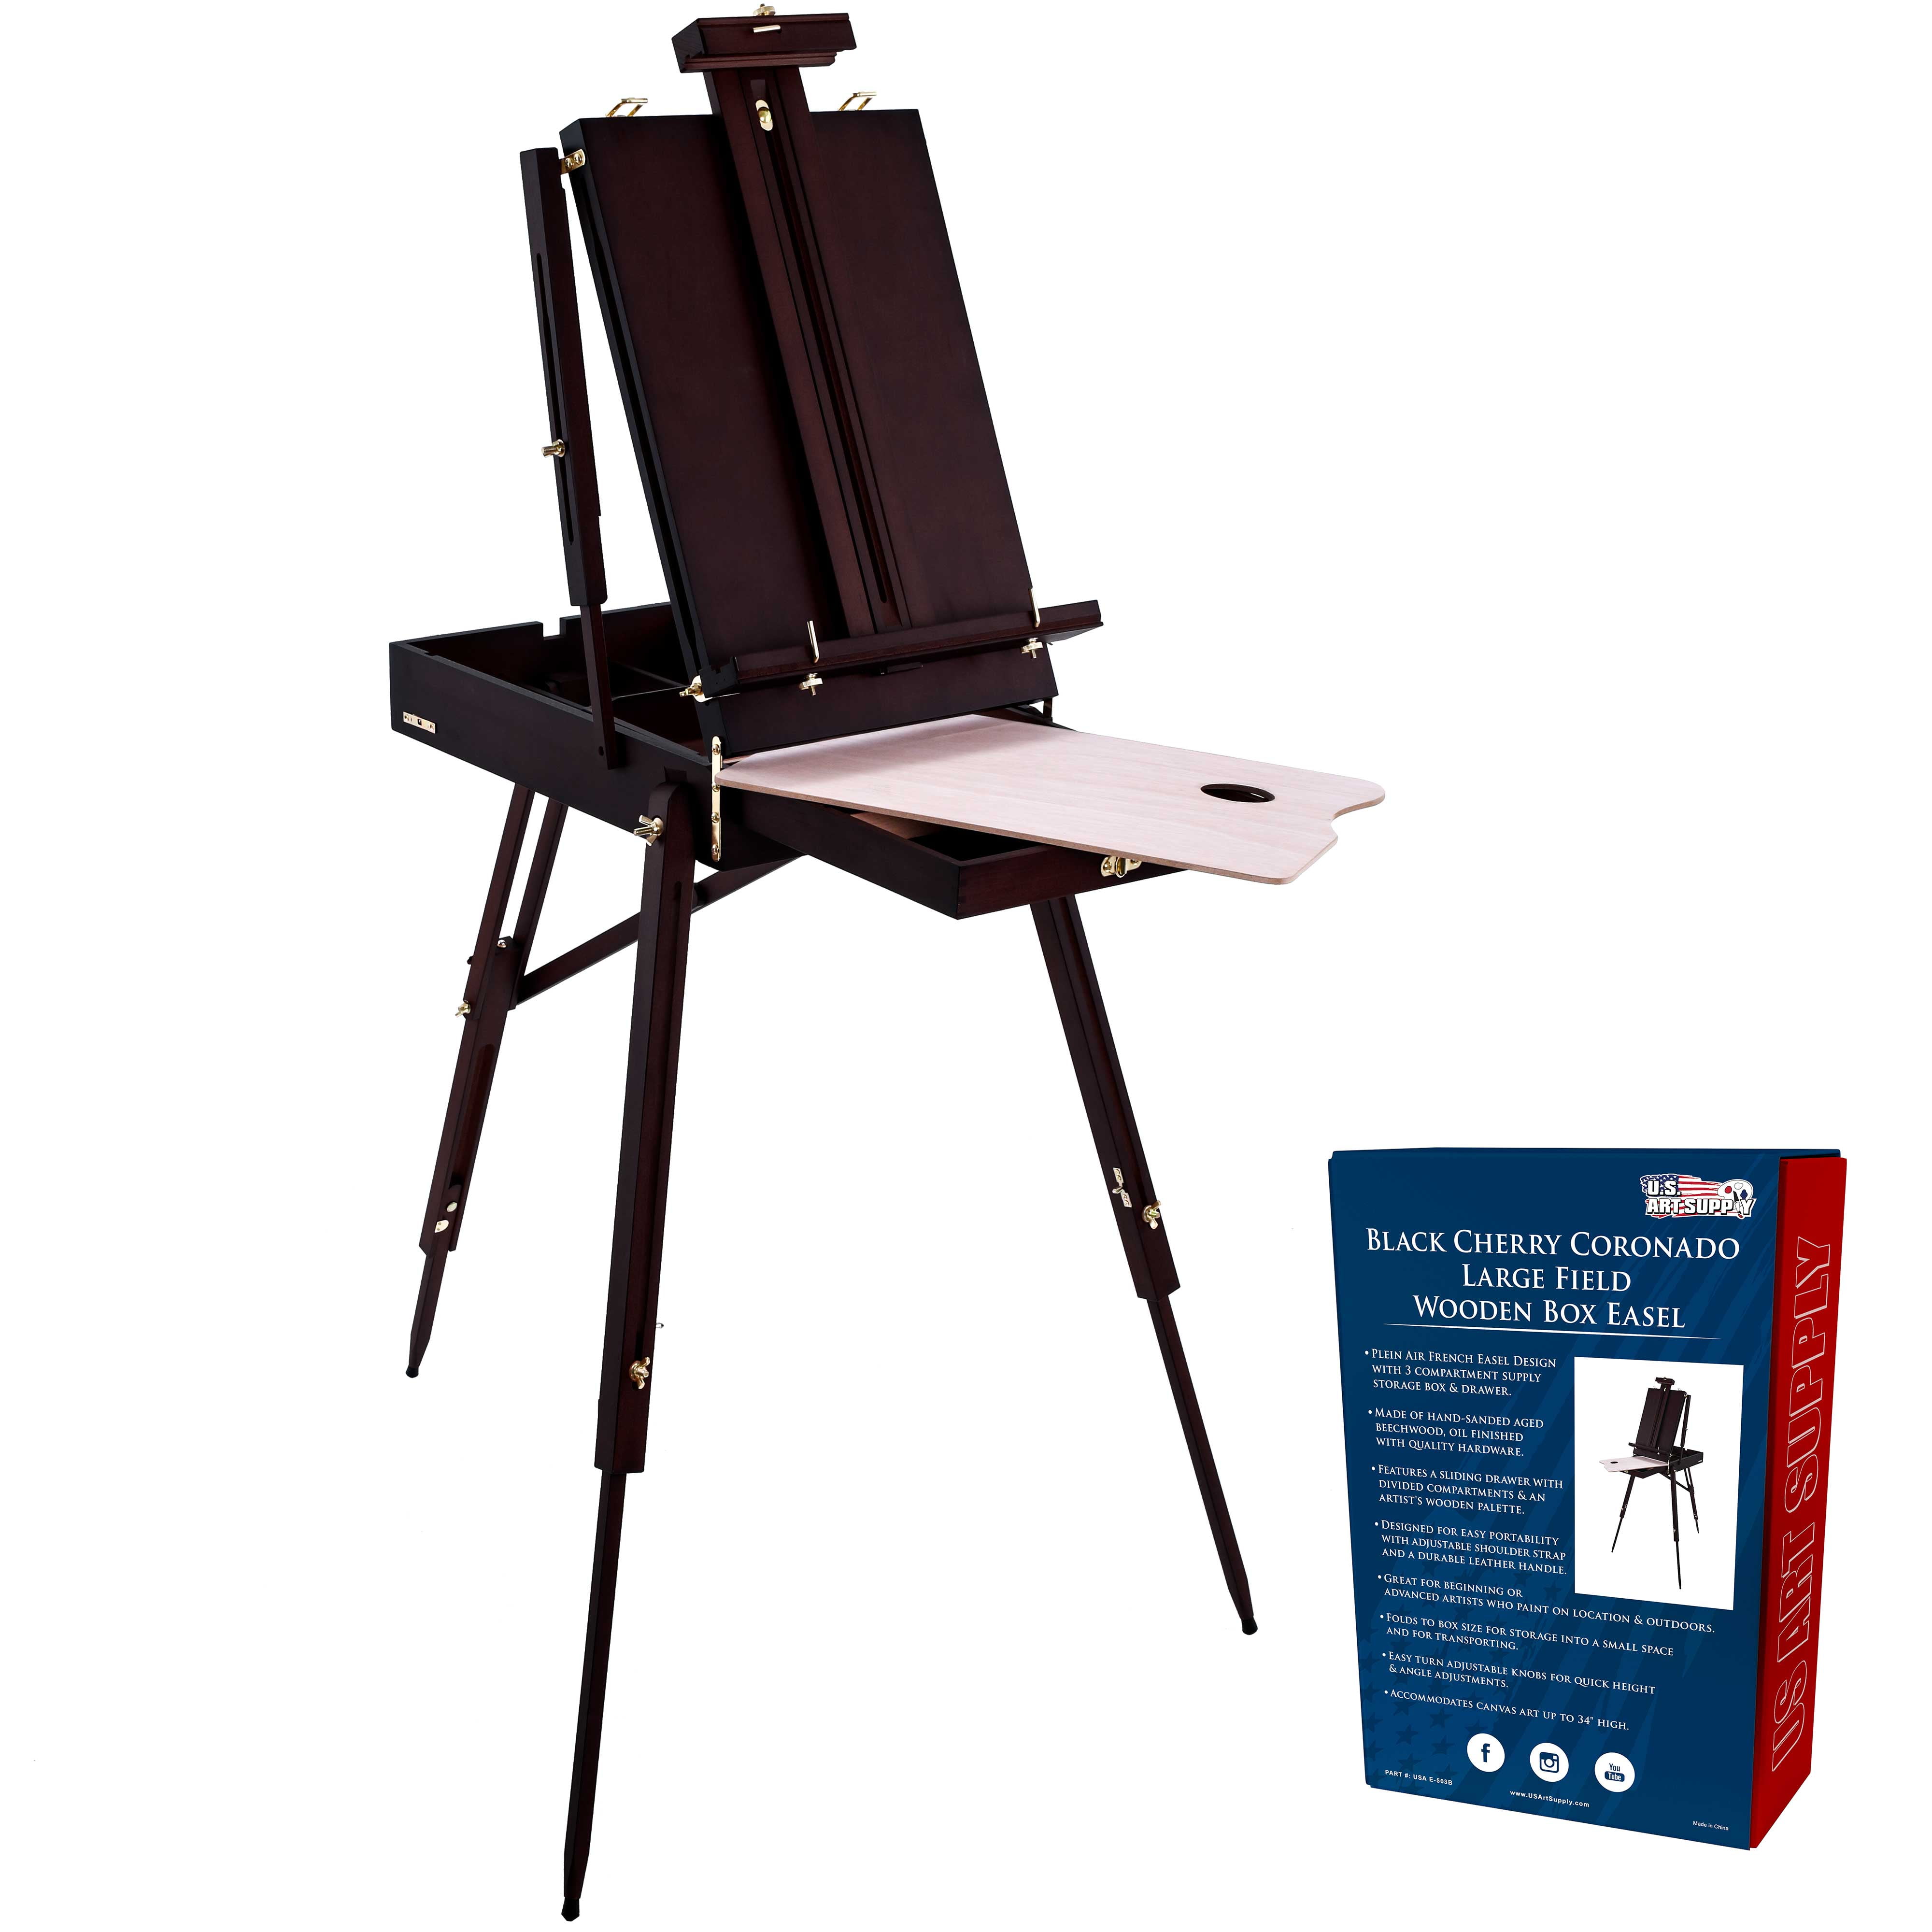 DESIGN DELIGHTS WOODEN SKETCH EASEL field easel for stretched artist canvas 180cm ready for use